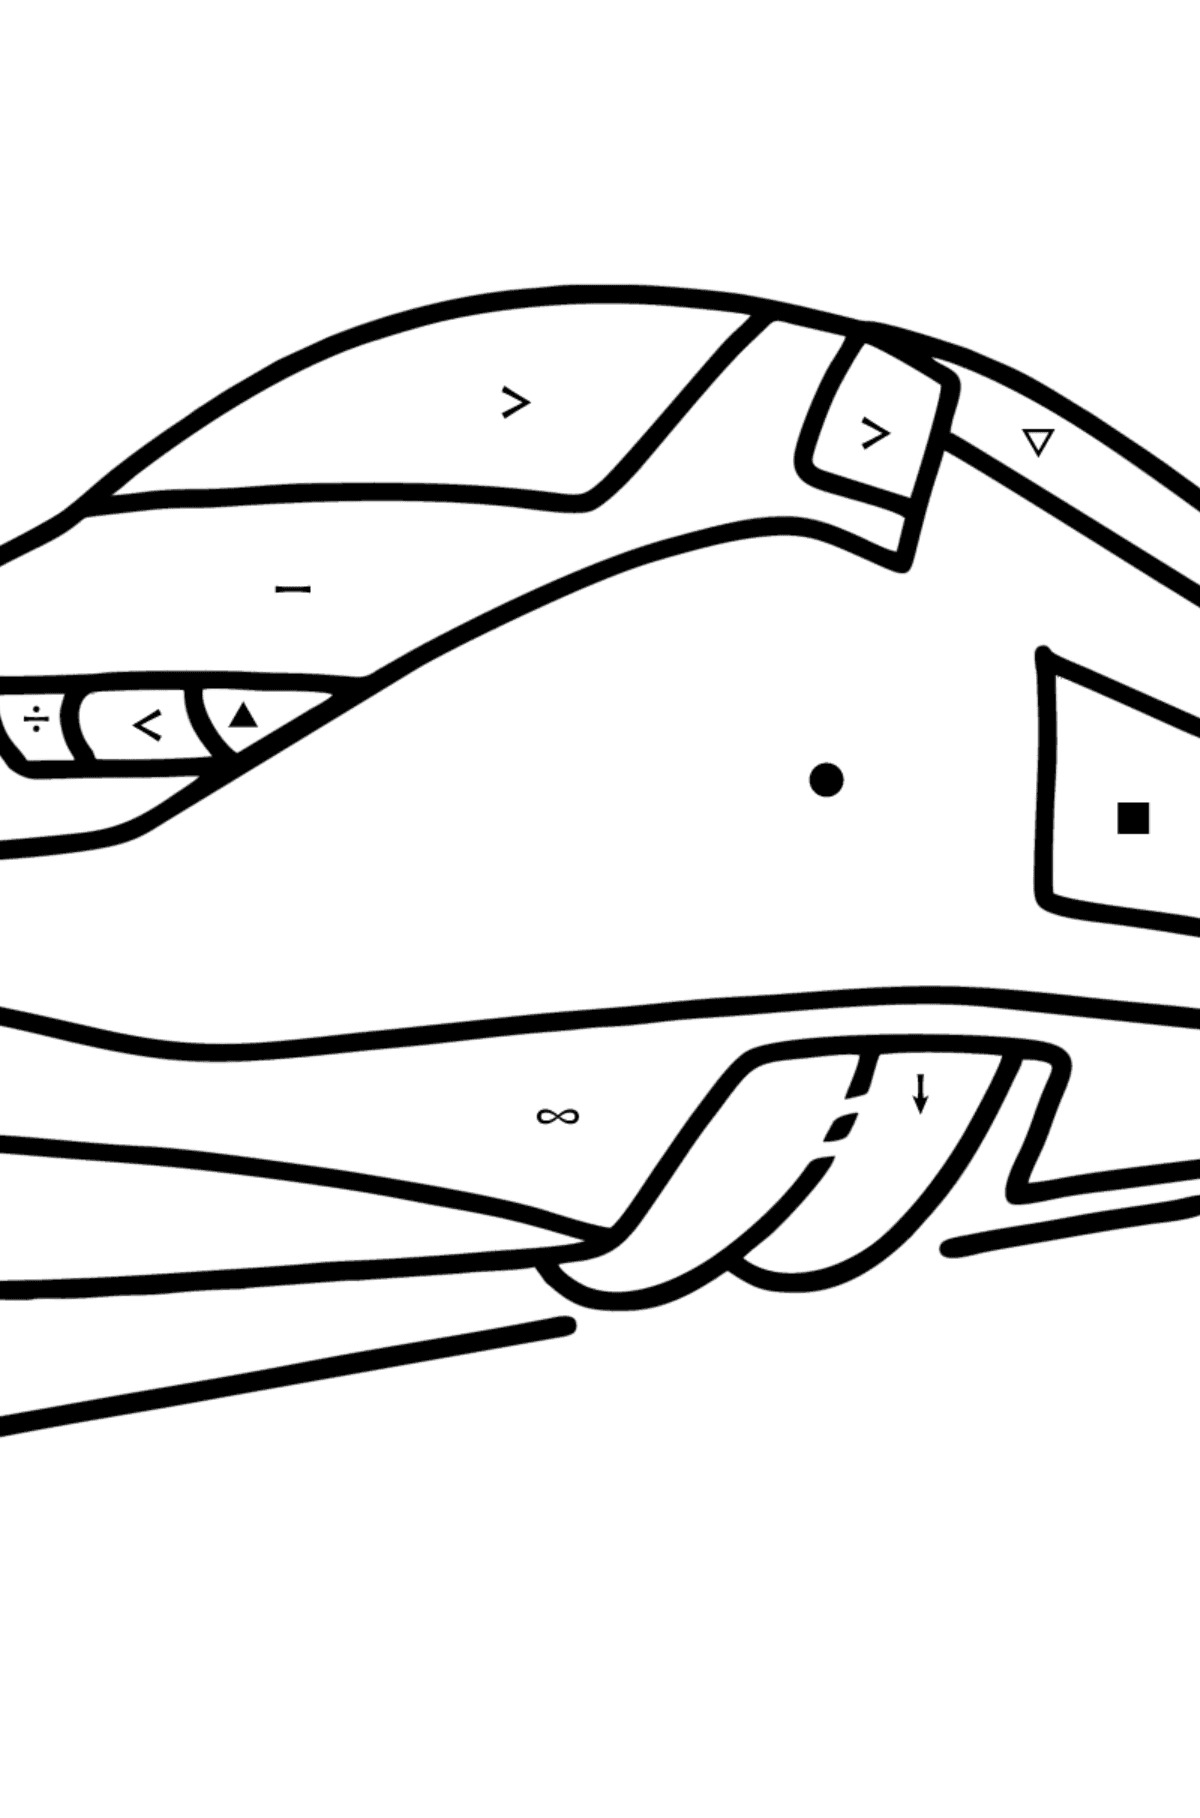 Train coloring page for kids - Coloring by Symbols for Kids